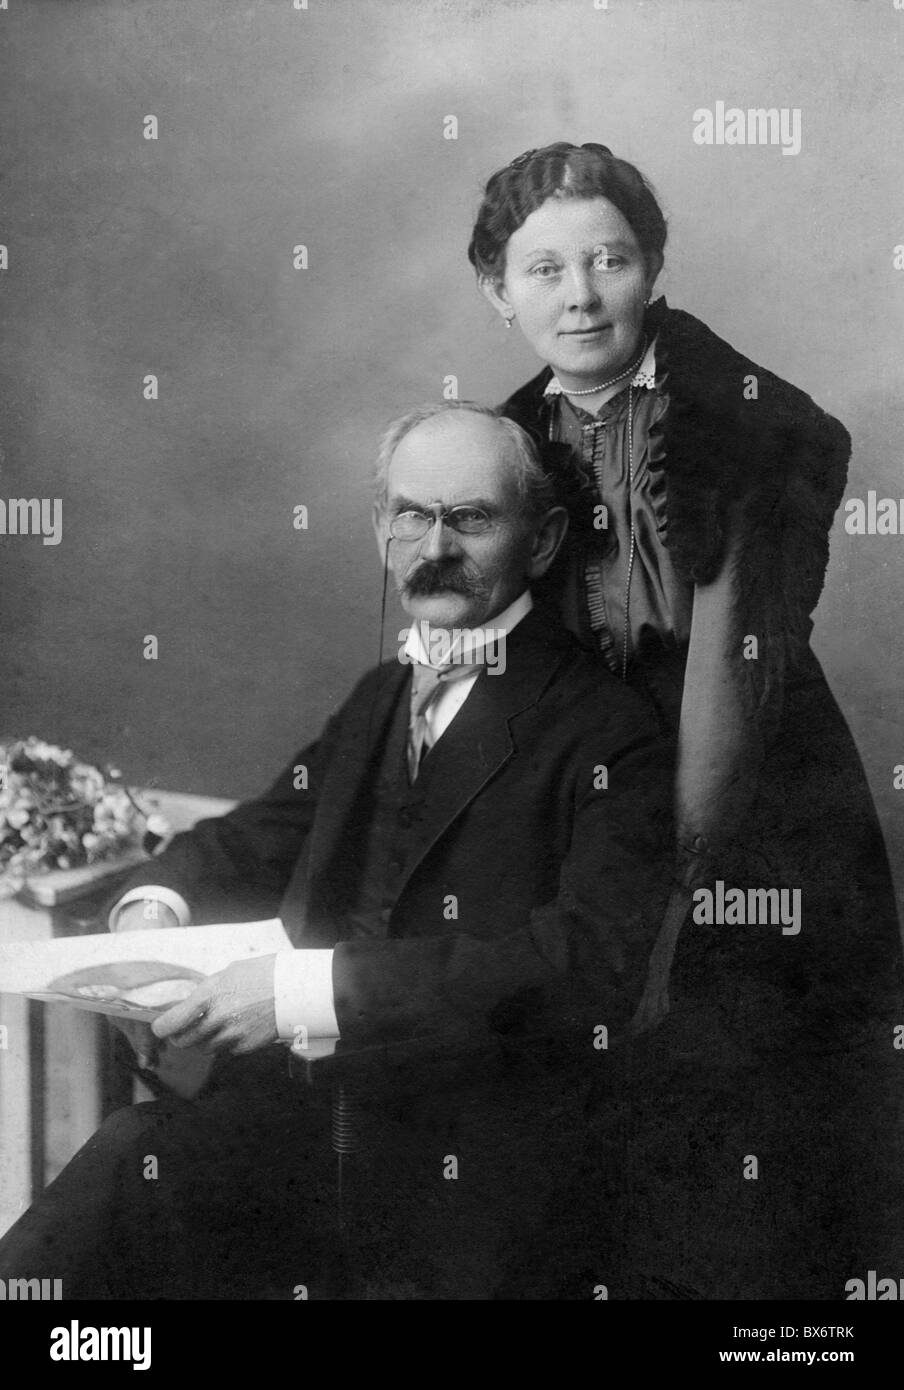 people, couples, 1900 - 1930, elderly couple, half length, circa 1900, moustache, glasses, pince-nez, historic, historical, 1900s, 20th century, half length, sitting, sit, standing, Austria, woman, women, female, man, men, male, people, nostalgia, Additional-Rights-Clearences-Not Available Stock Photo